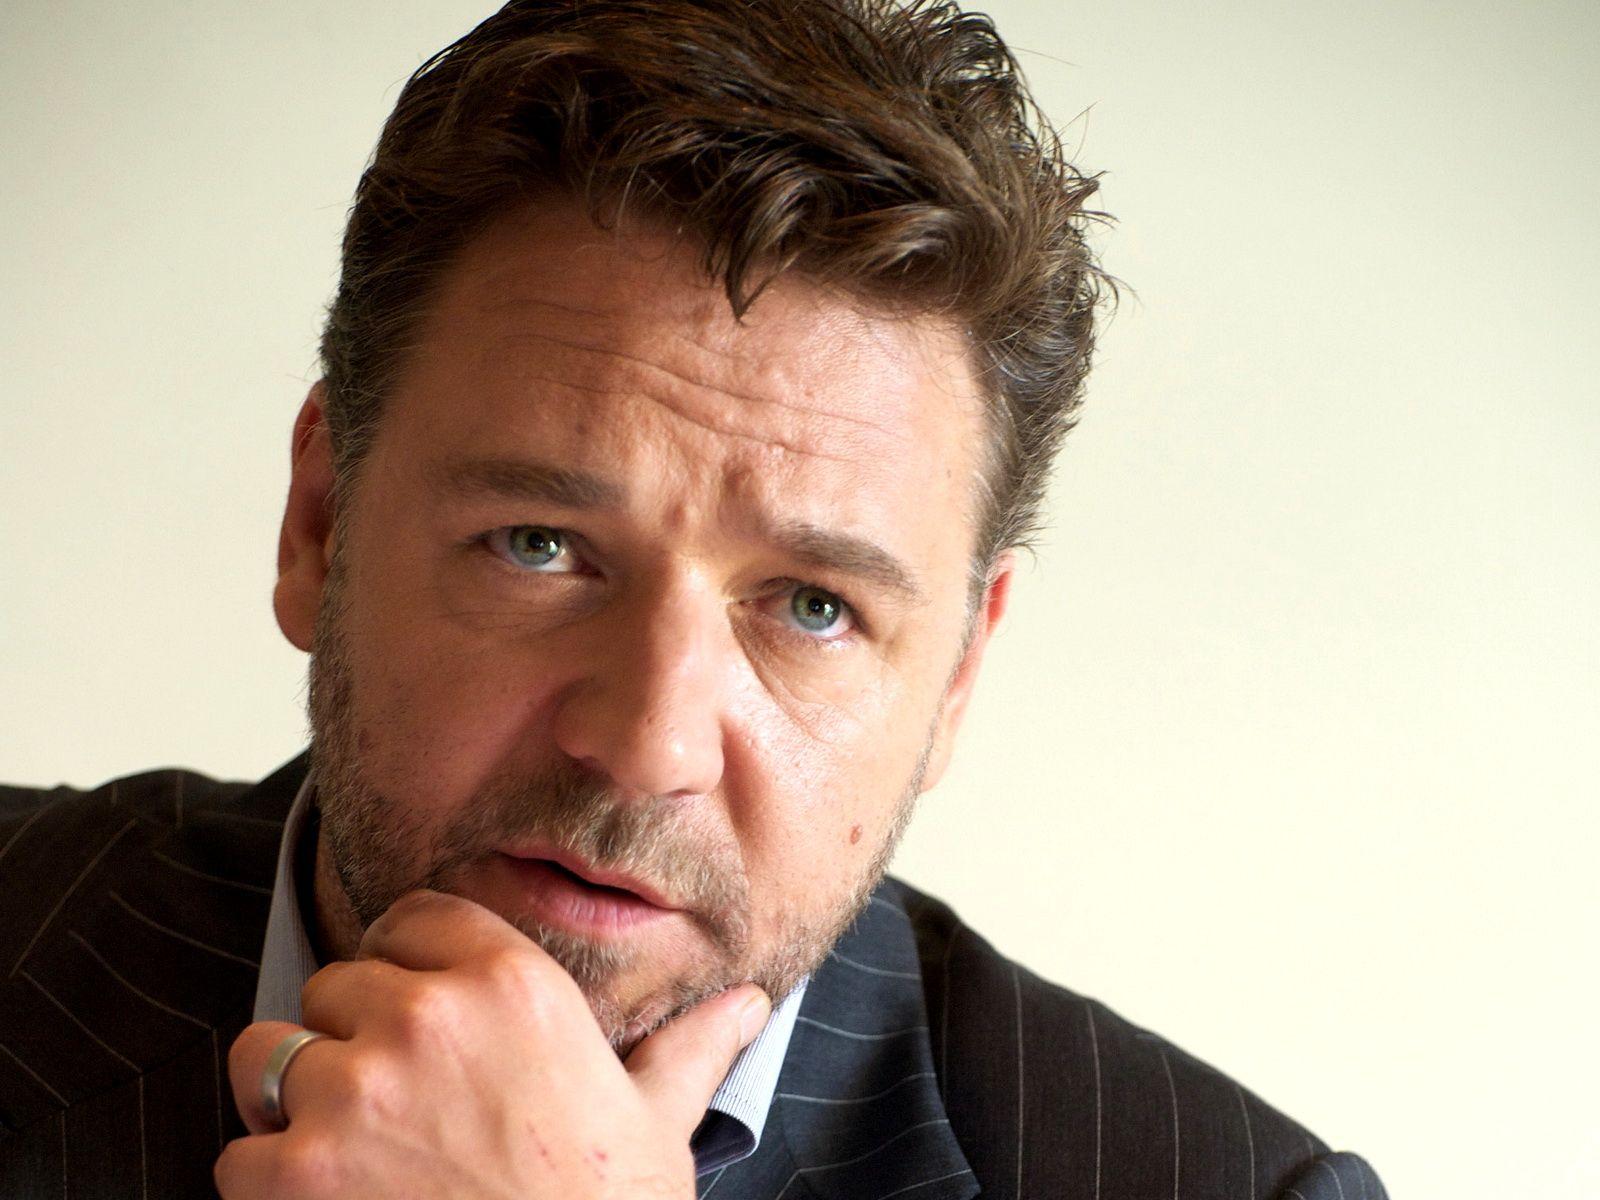 Russell Crowe Celebrity Wallpaper Picture 52382 1600x1200 px